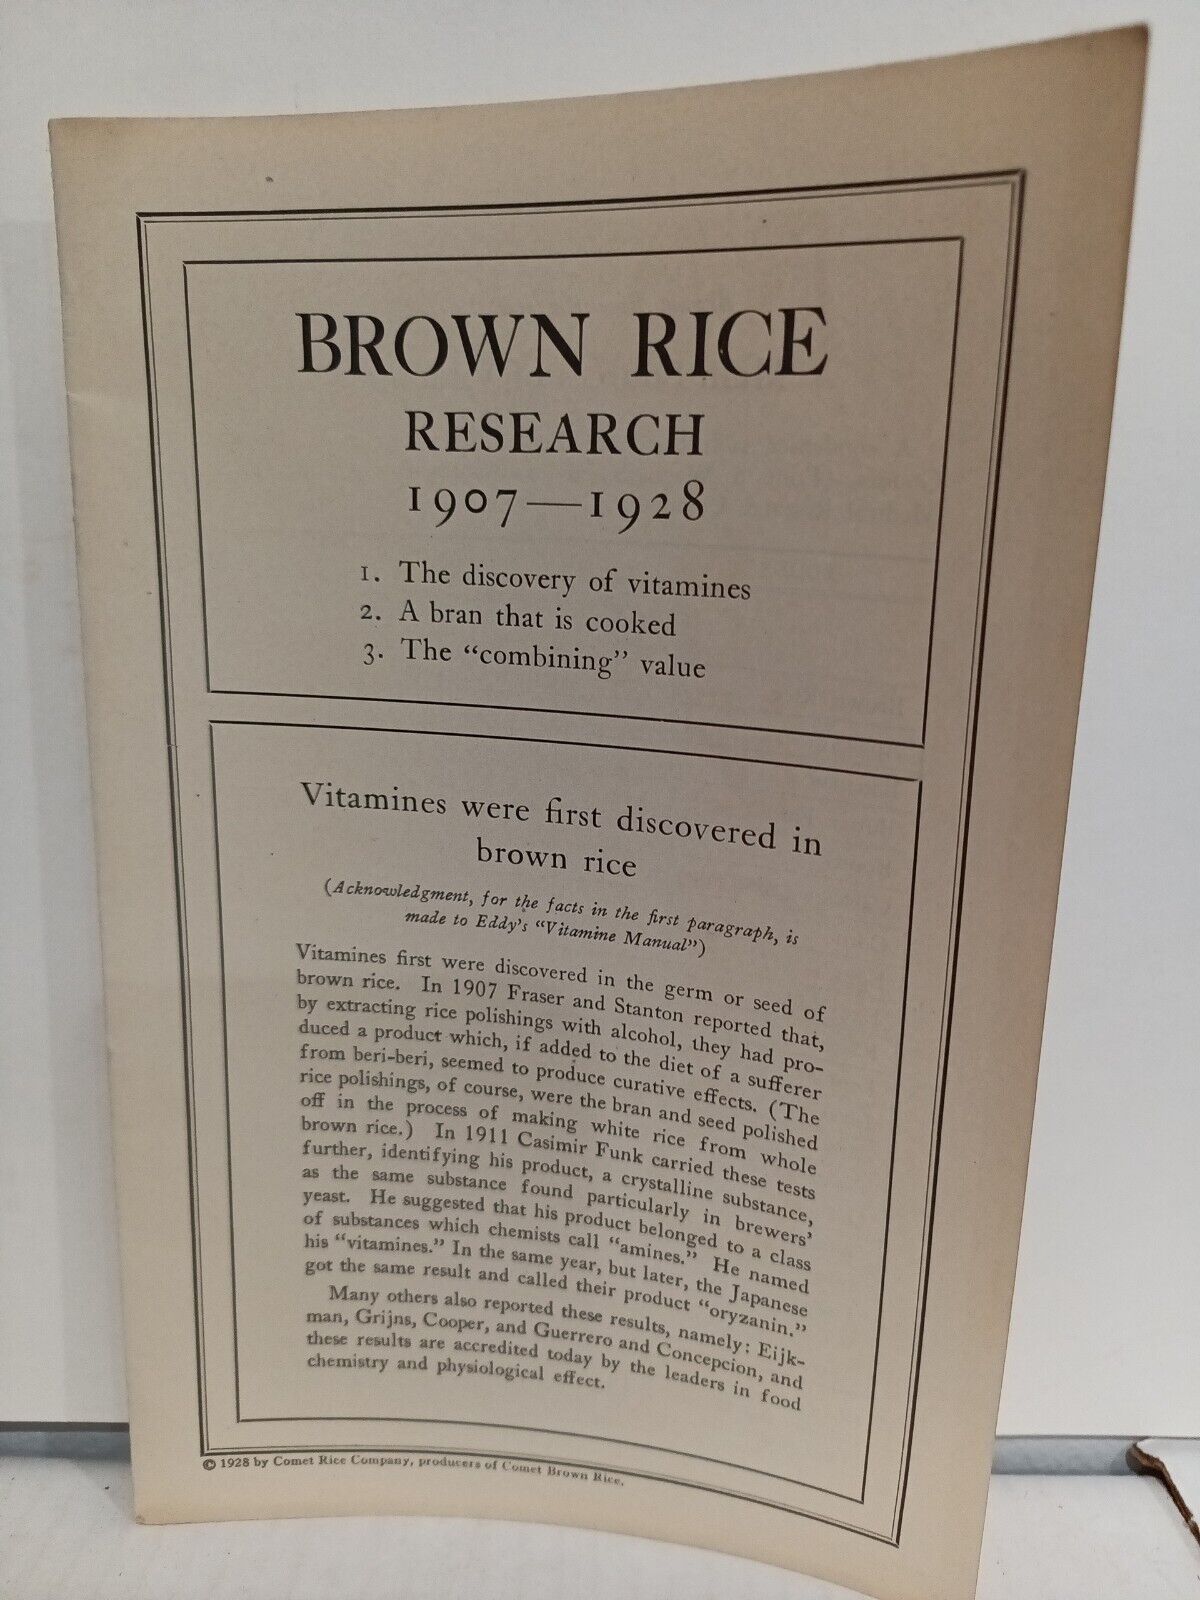 Brown Rice Research 1907-1928 Comet Rice Company 1928 Illustrated WTJ